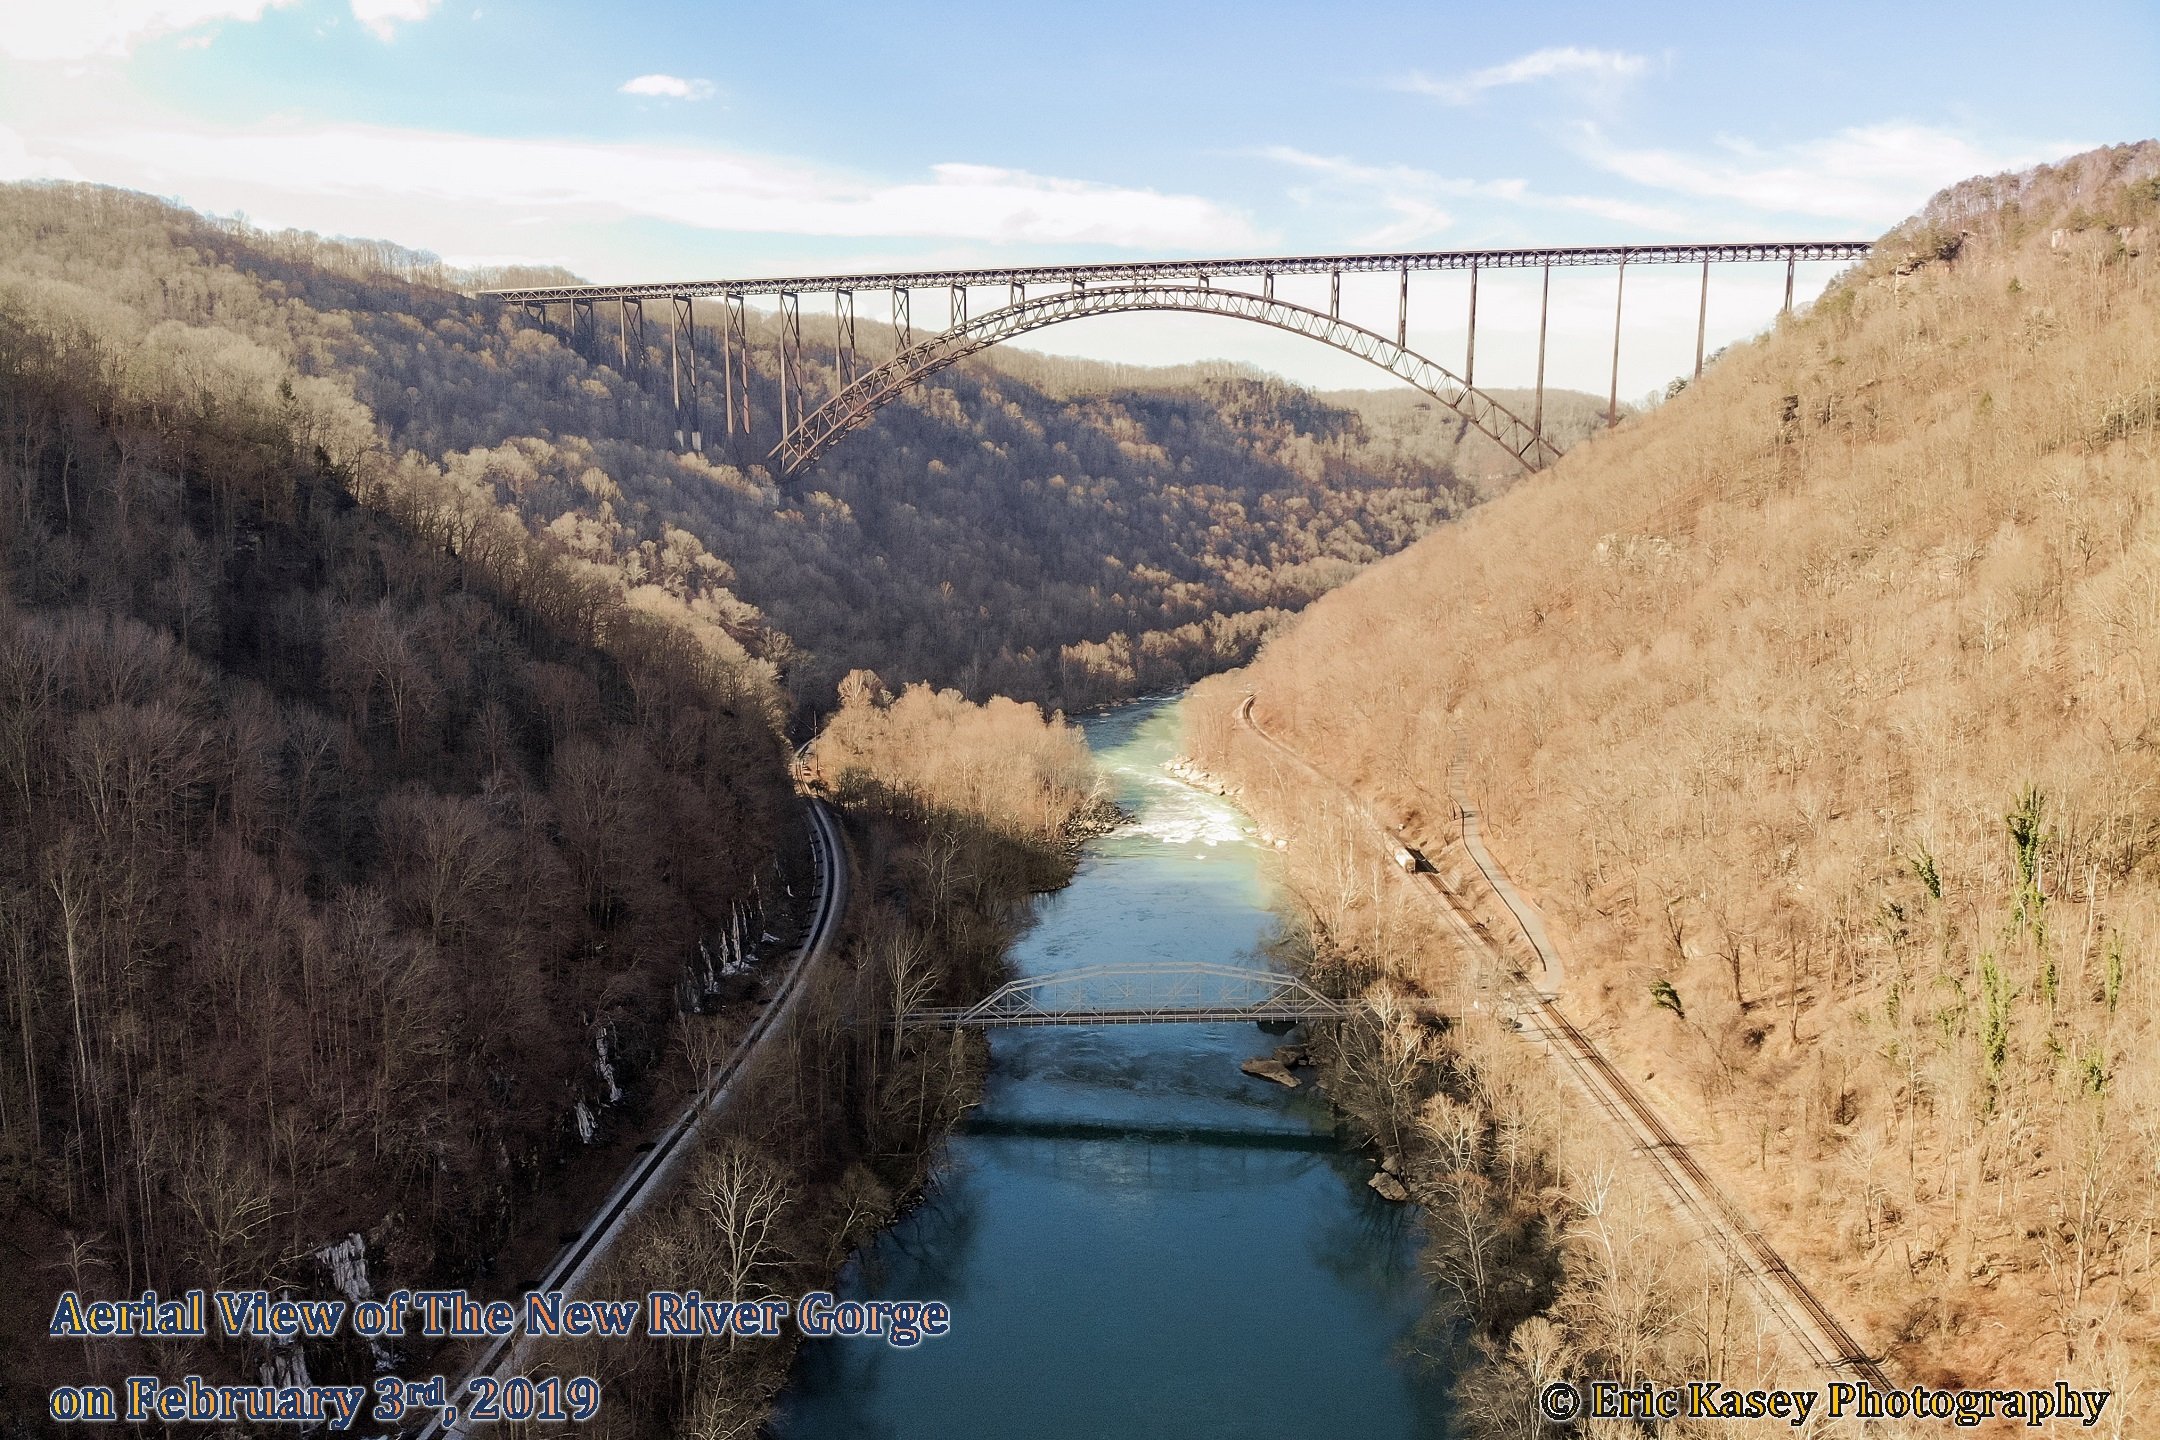 6 - Aerial View of The New River Gorge on February 3rd, 2019.JPG